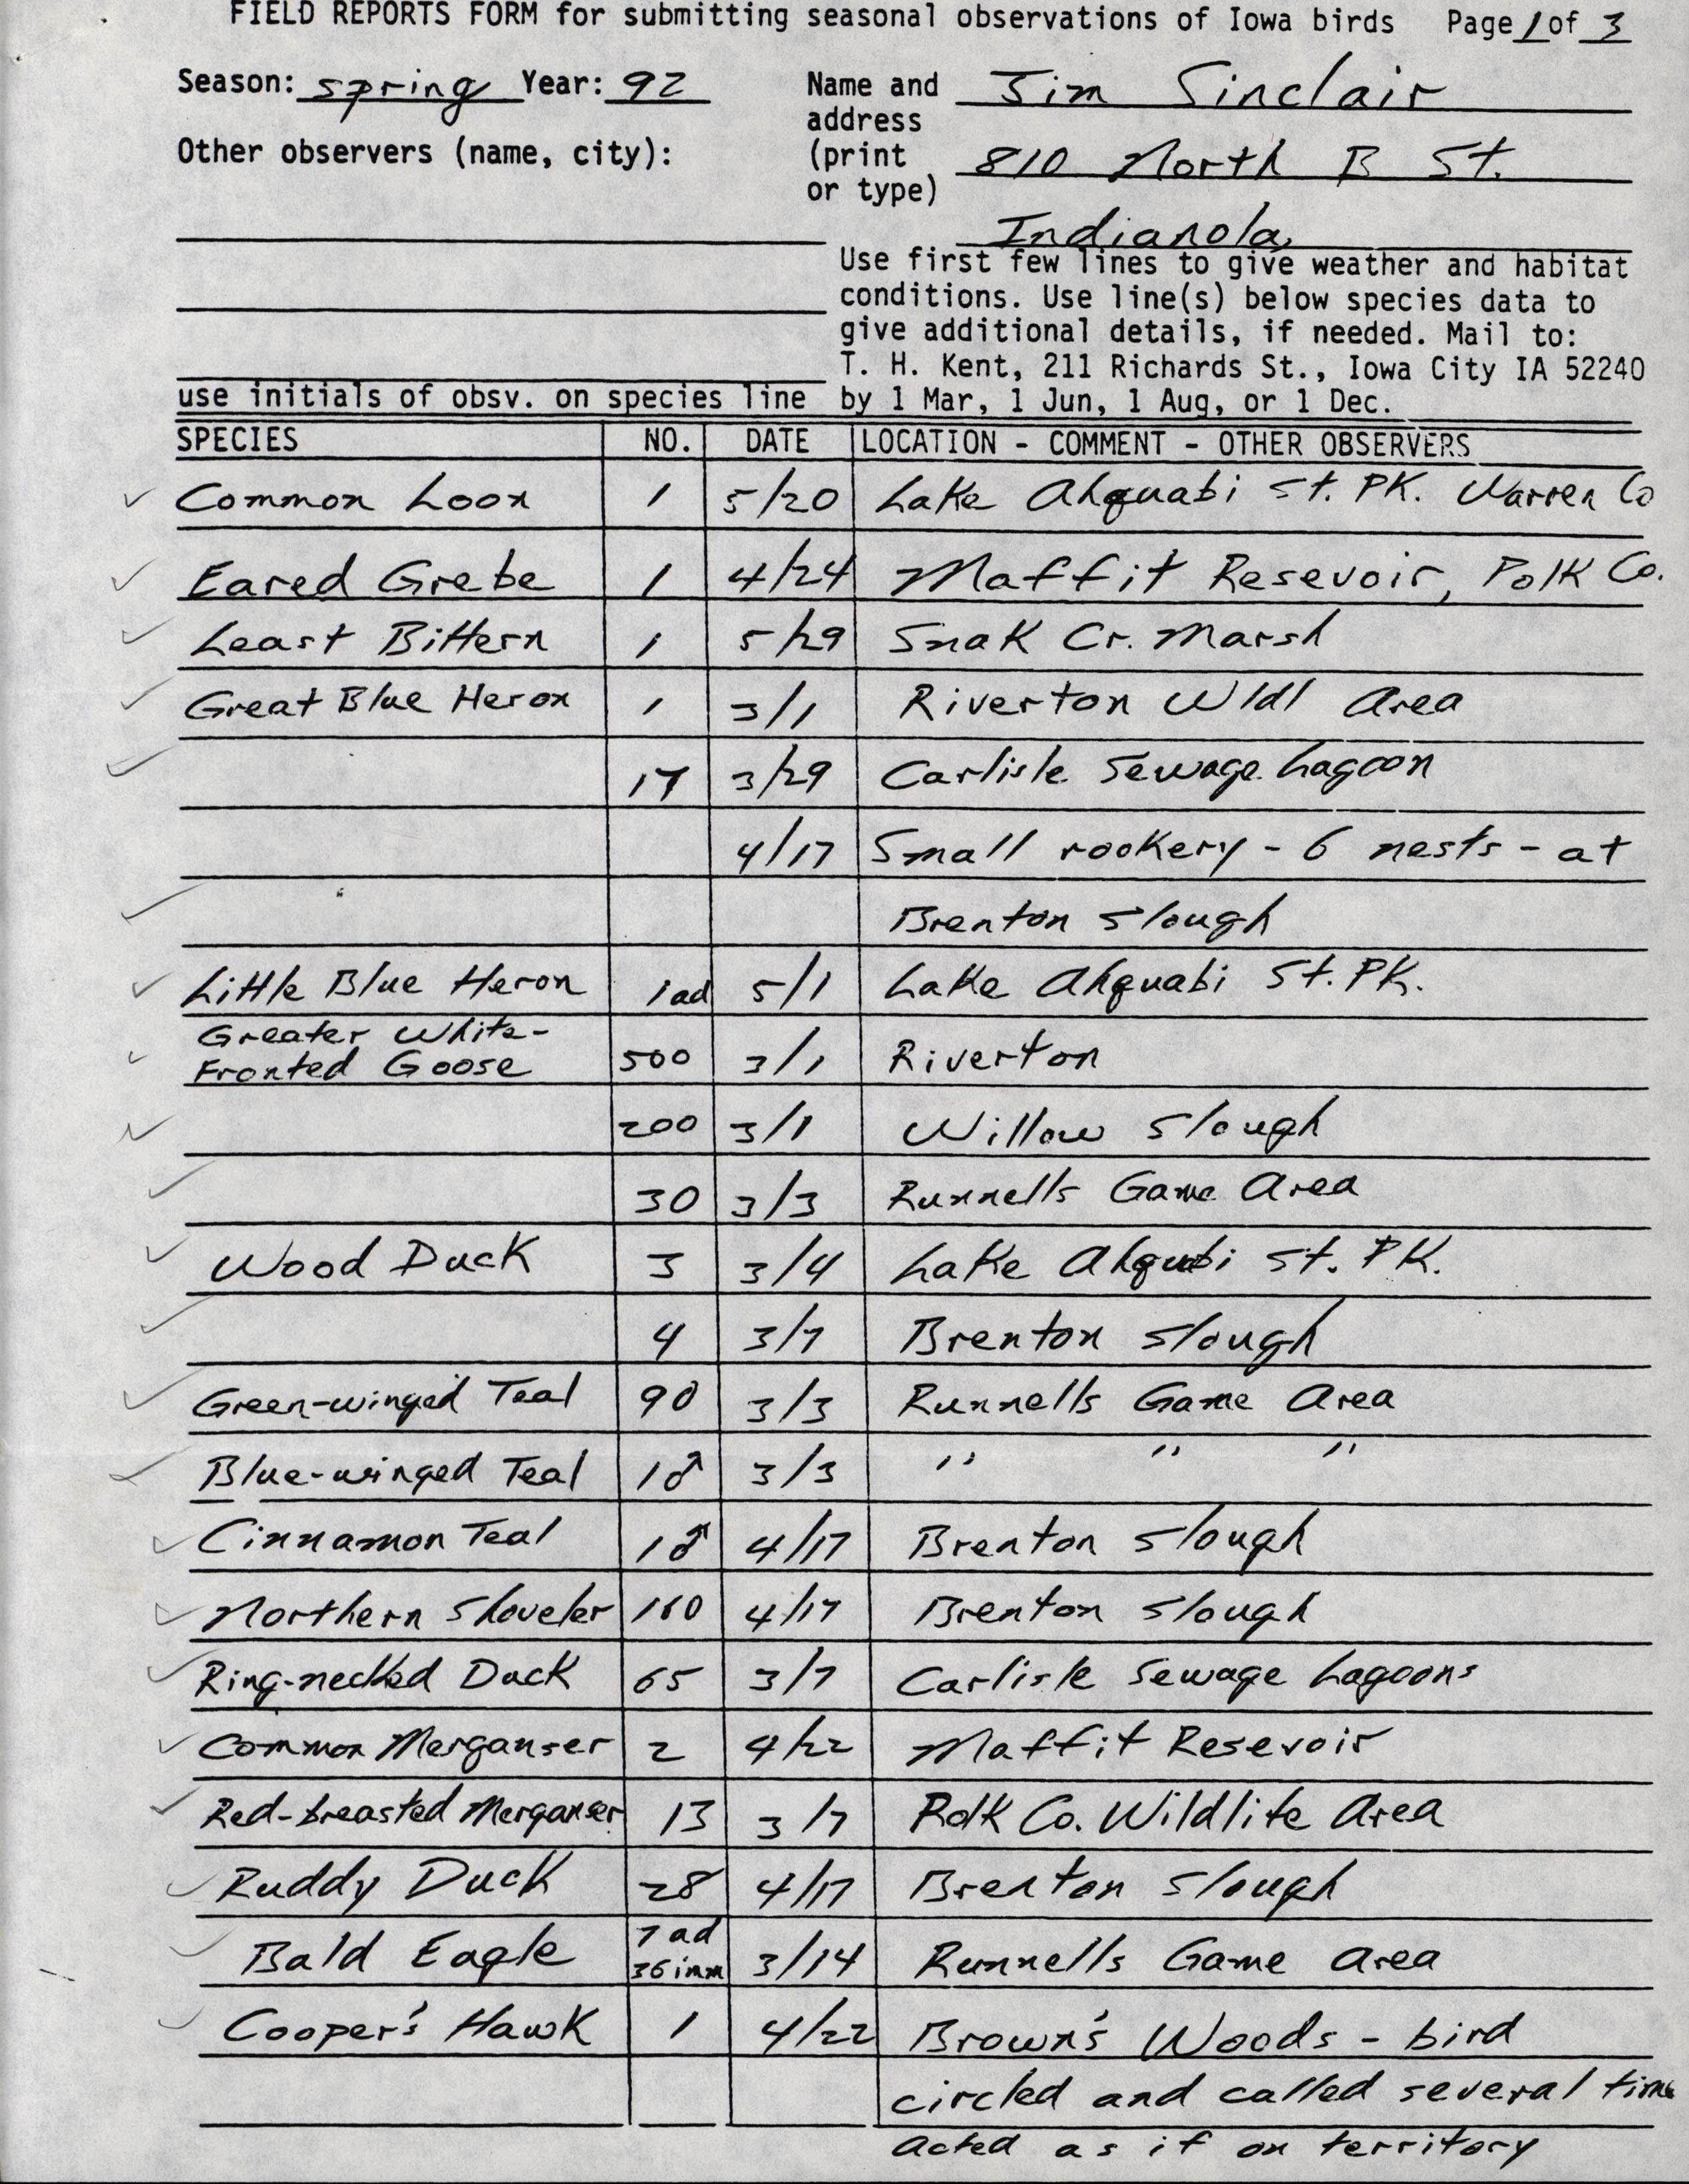 Field reports form for submitting seasonal observations of Iowa birds, Jim Sinclair, spring 1992